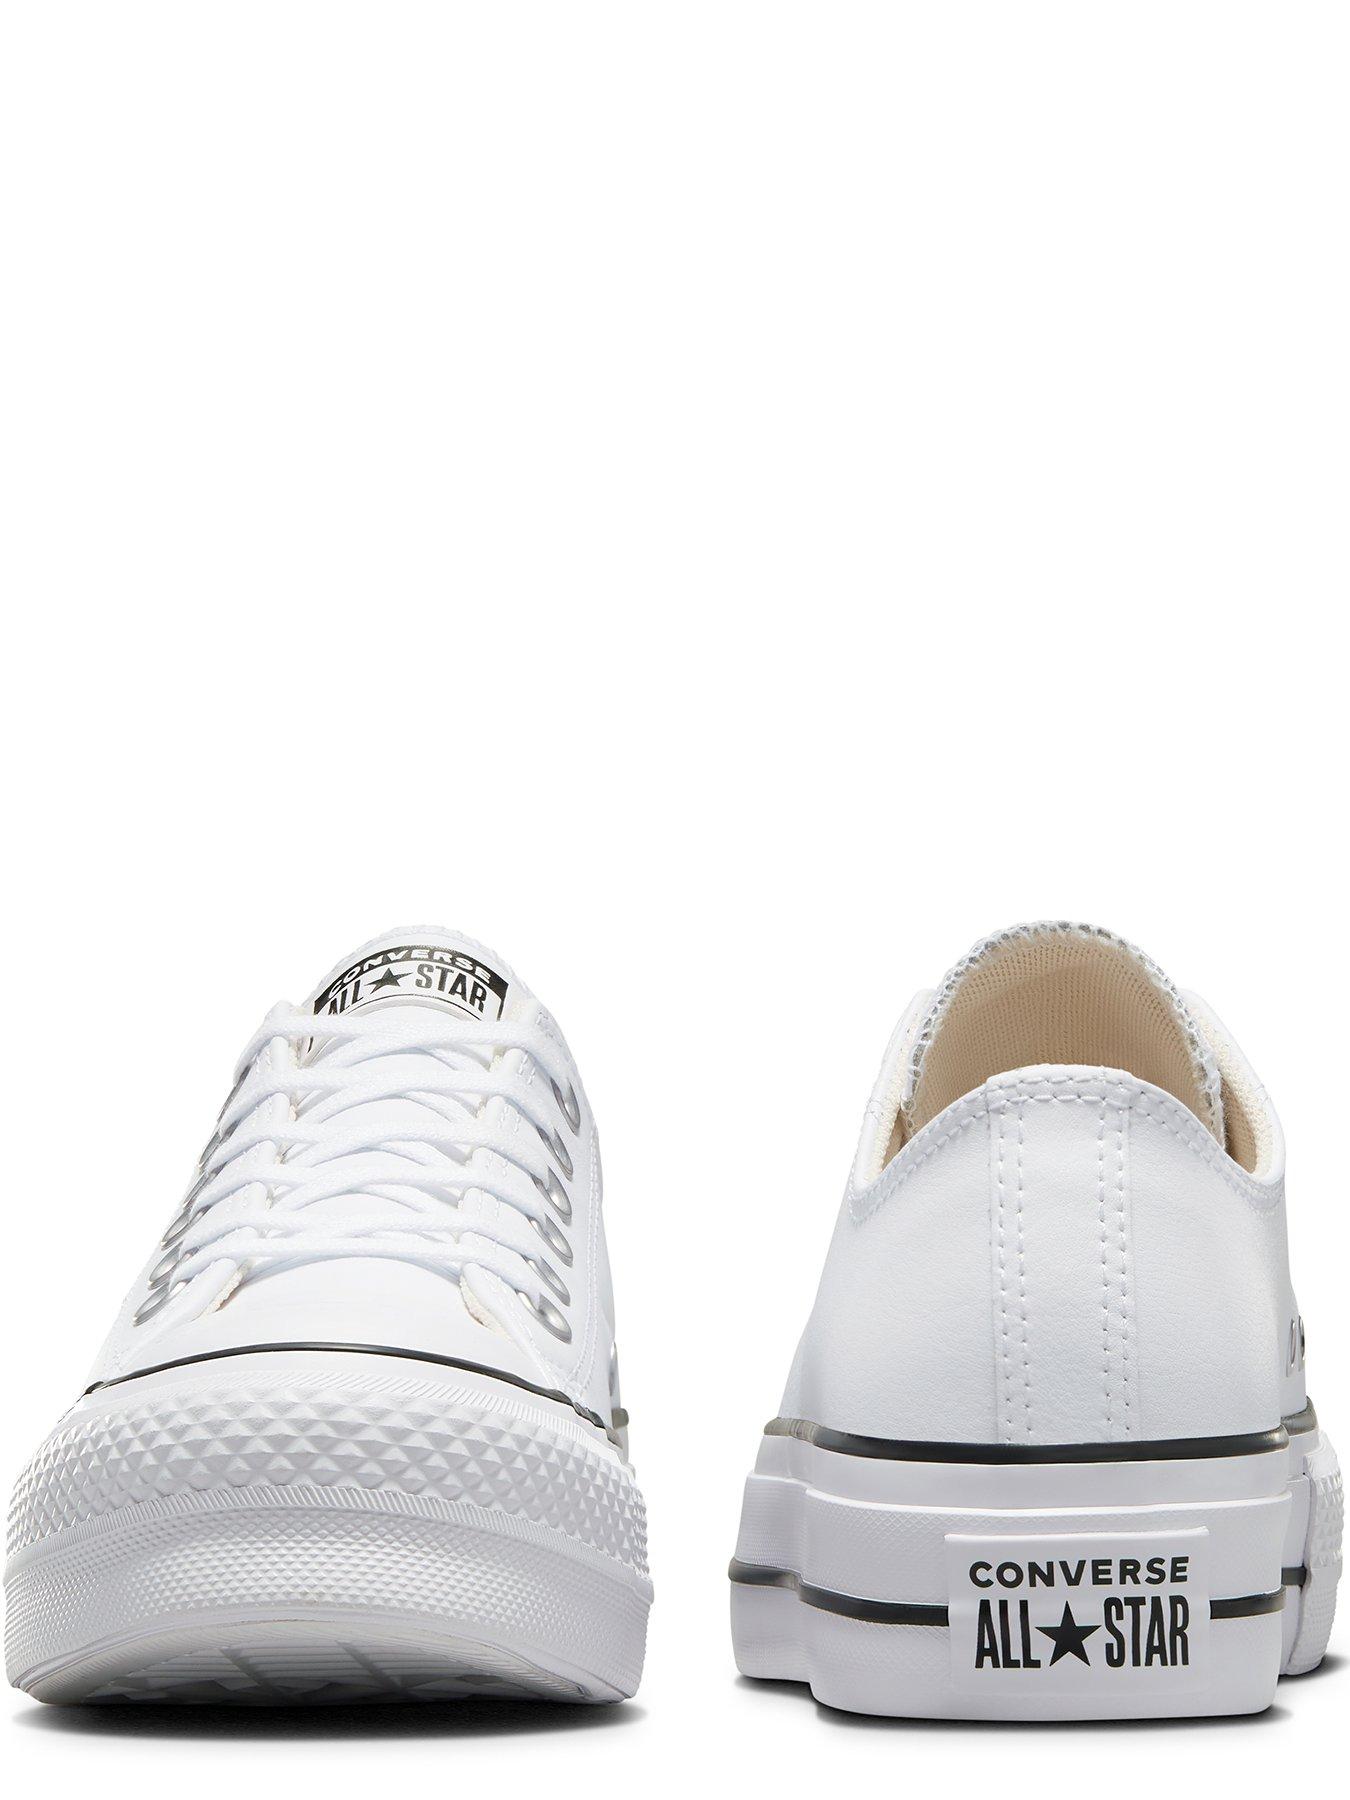 white ox leather converse